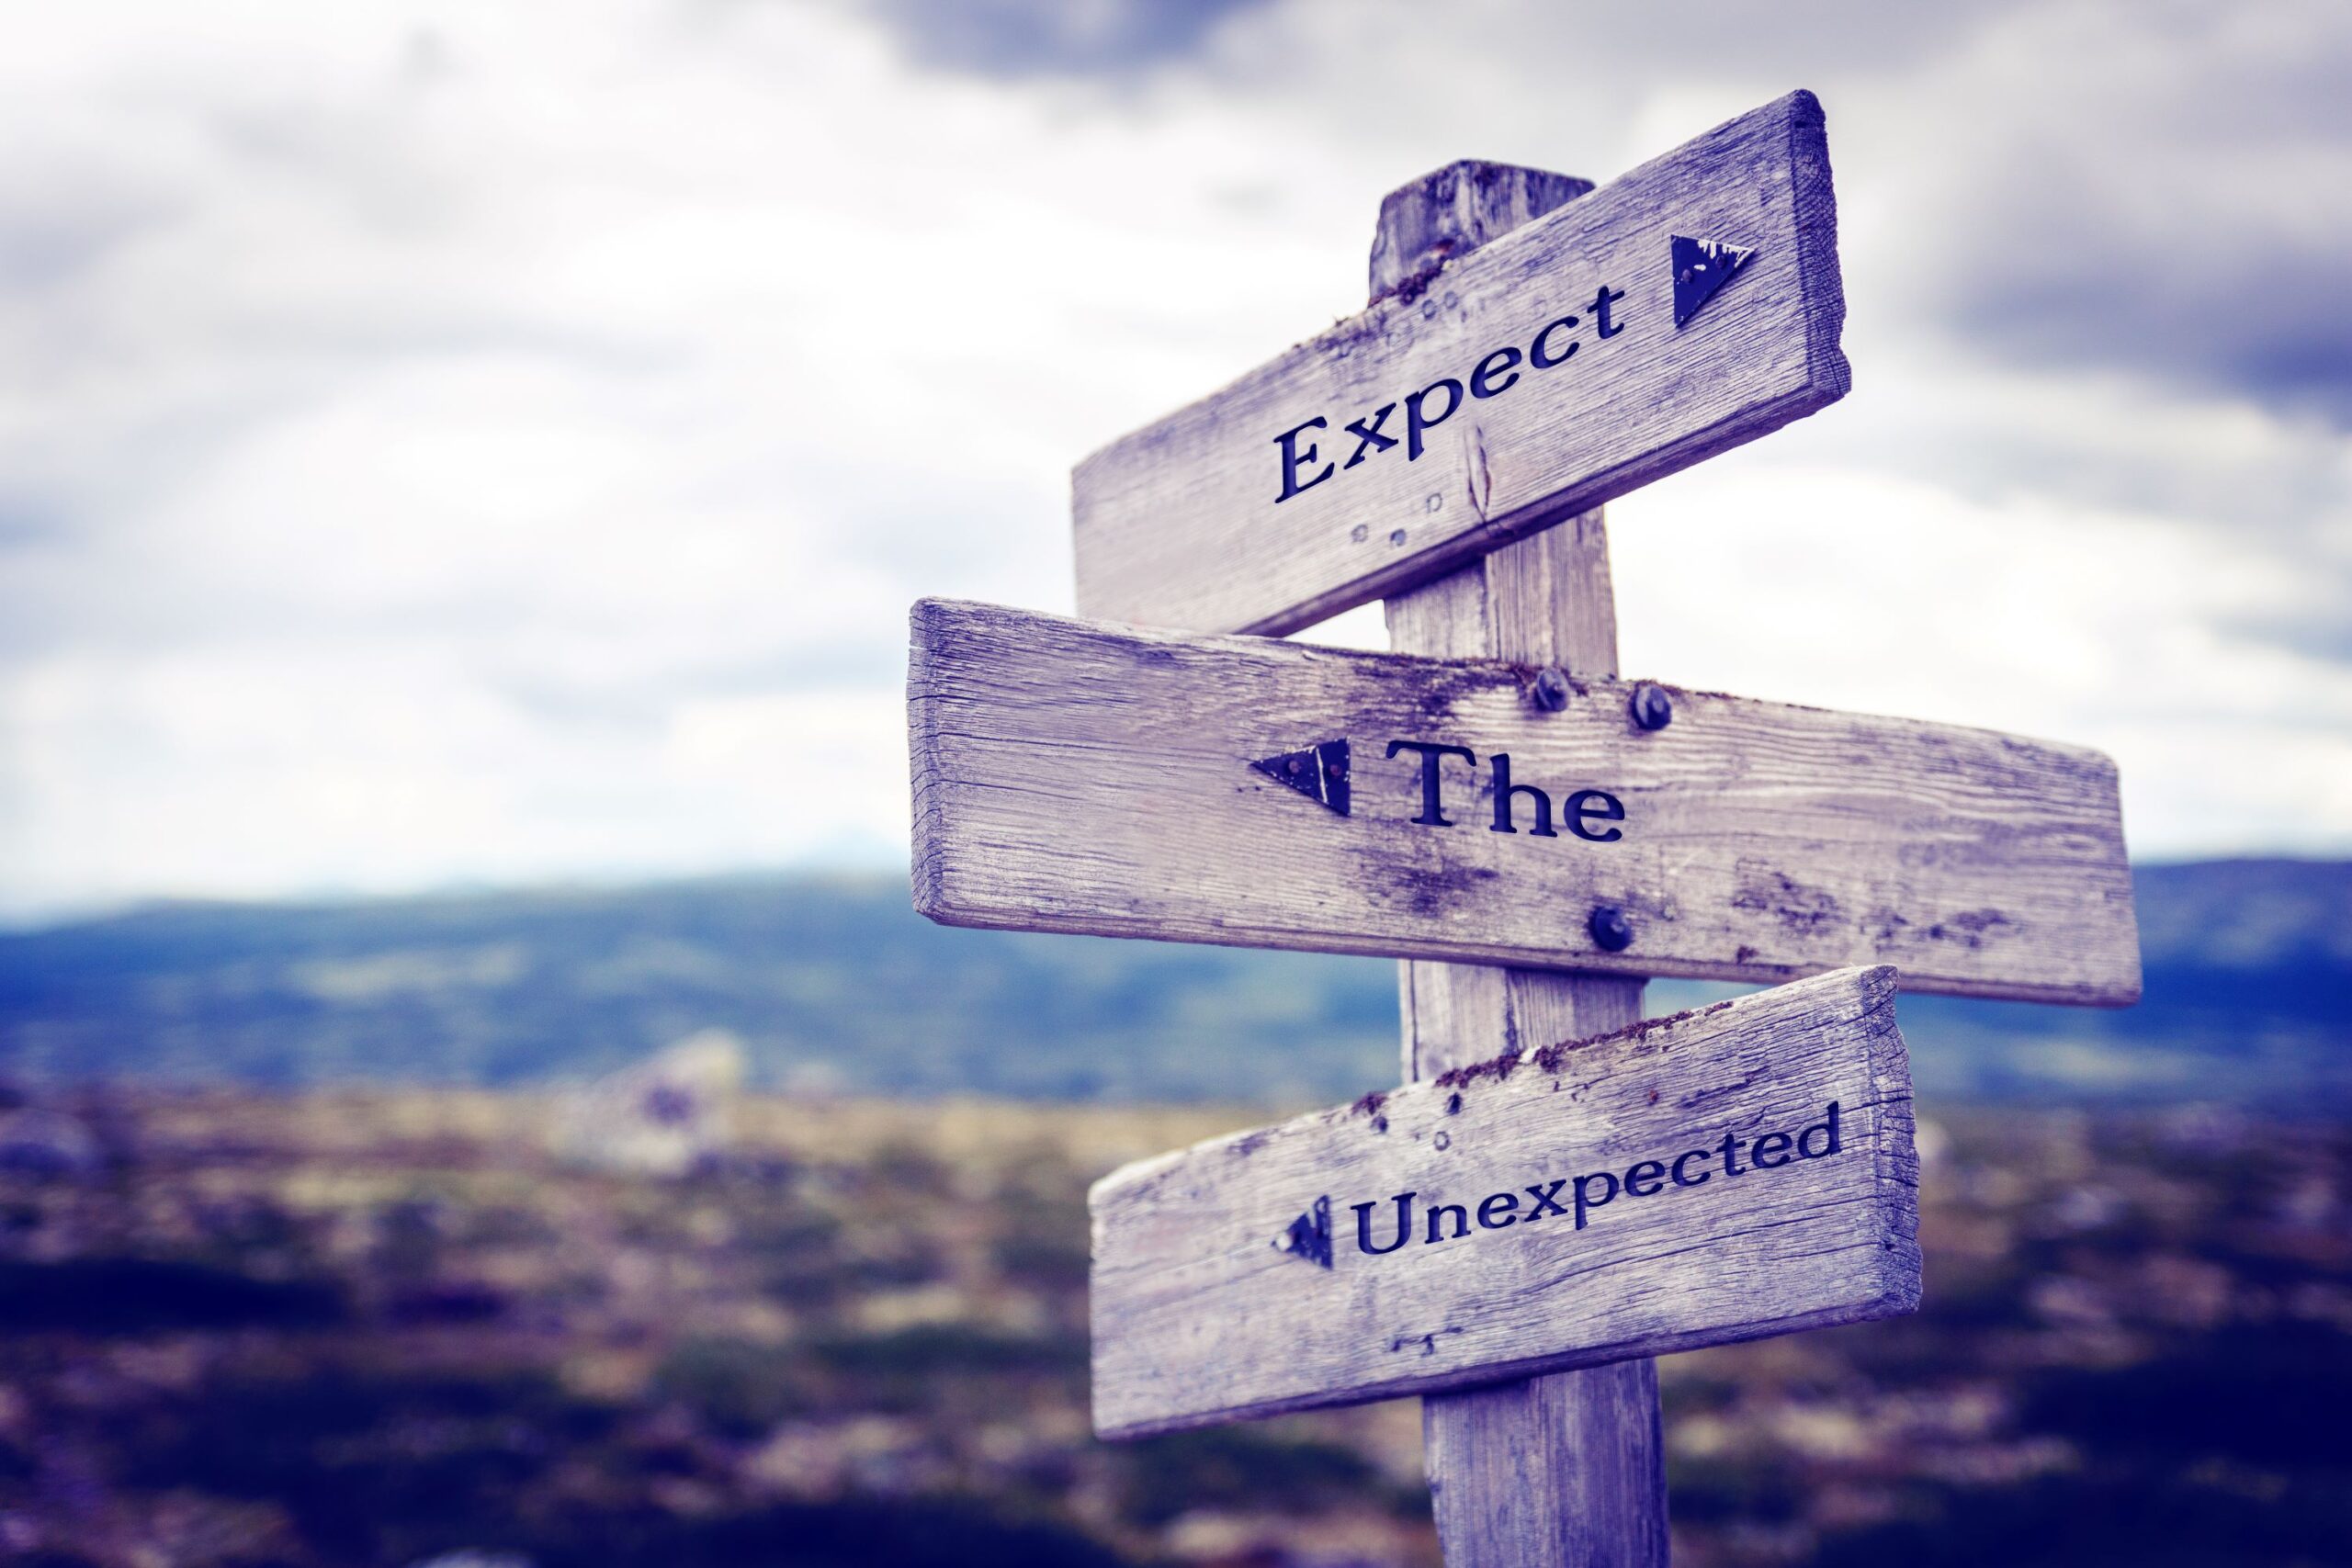 Expect the Unexpected written in wooden signpost outdoors in nature